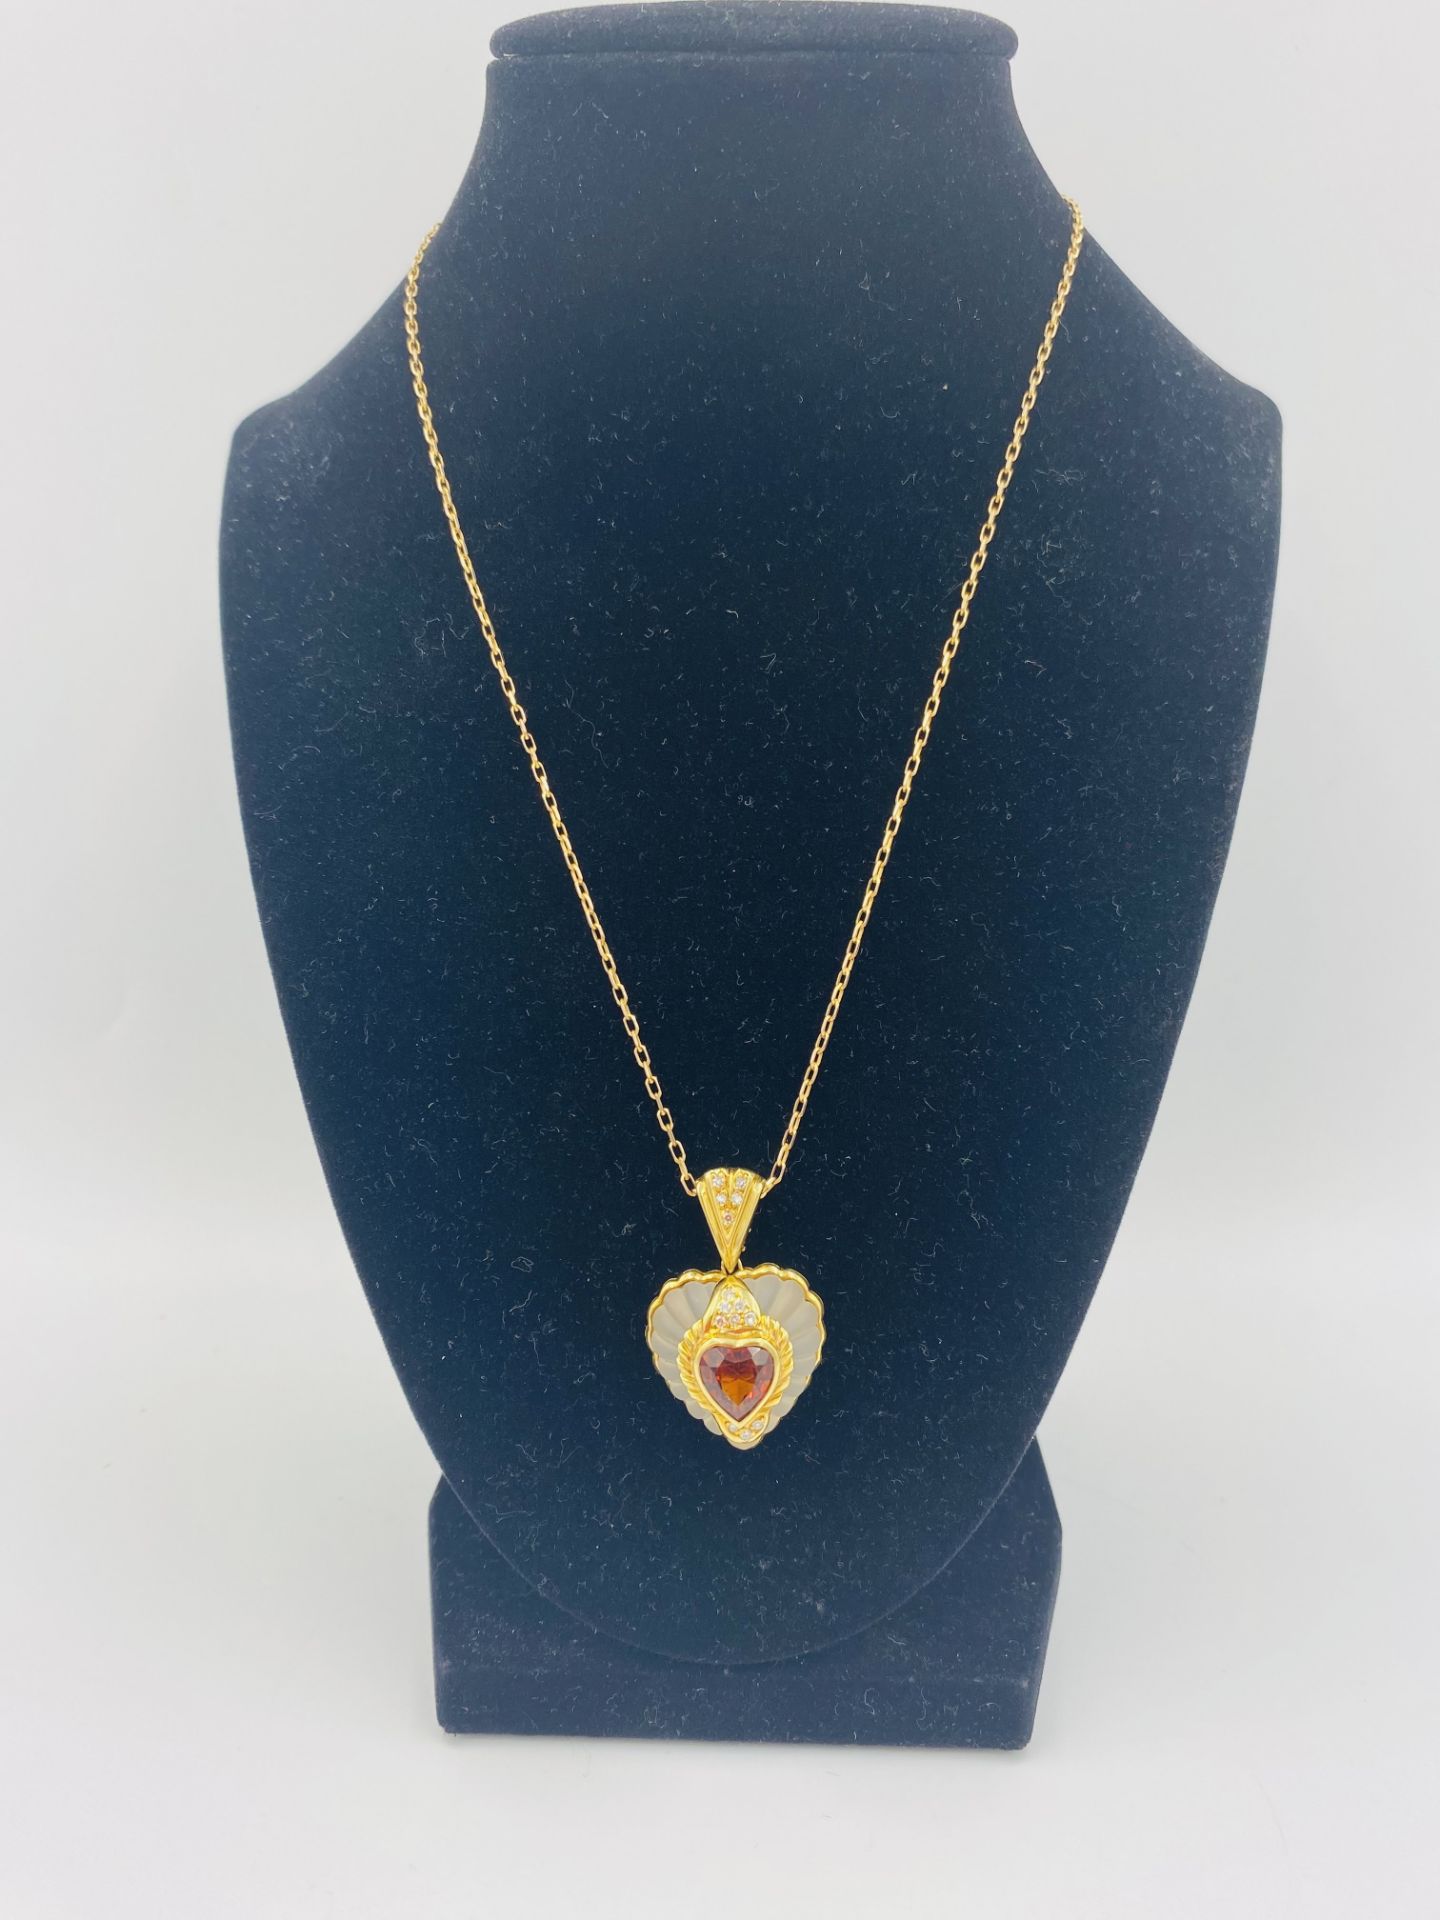 Rock crystal heart shaped pendant with 18ct gold mount - Image 2 of 6